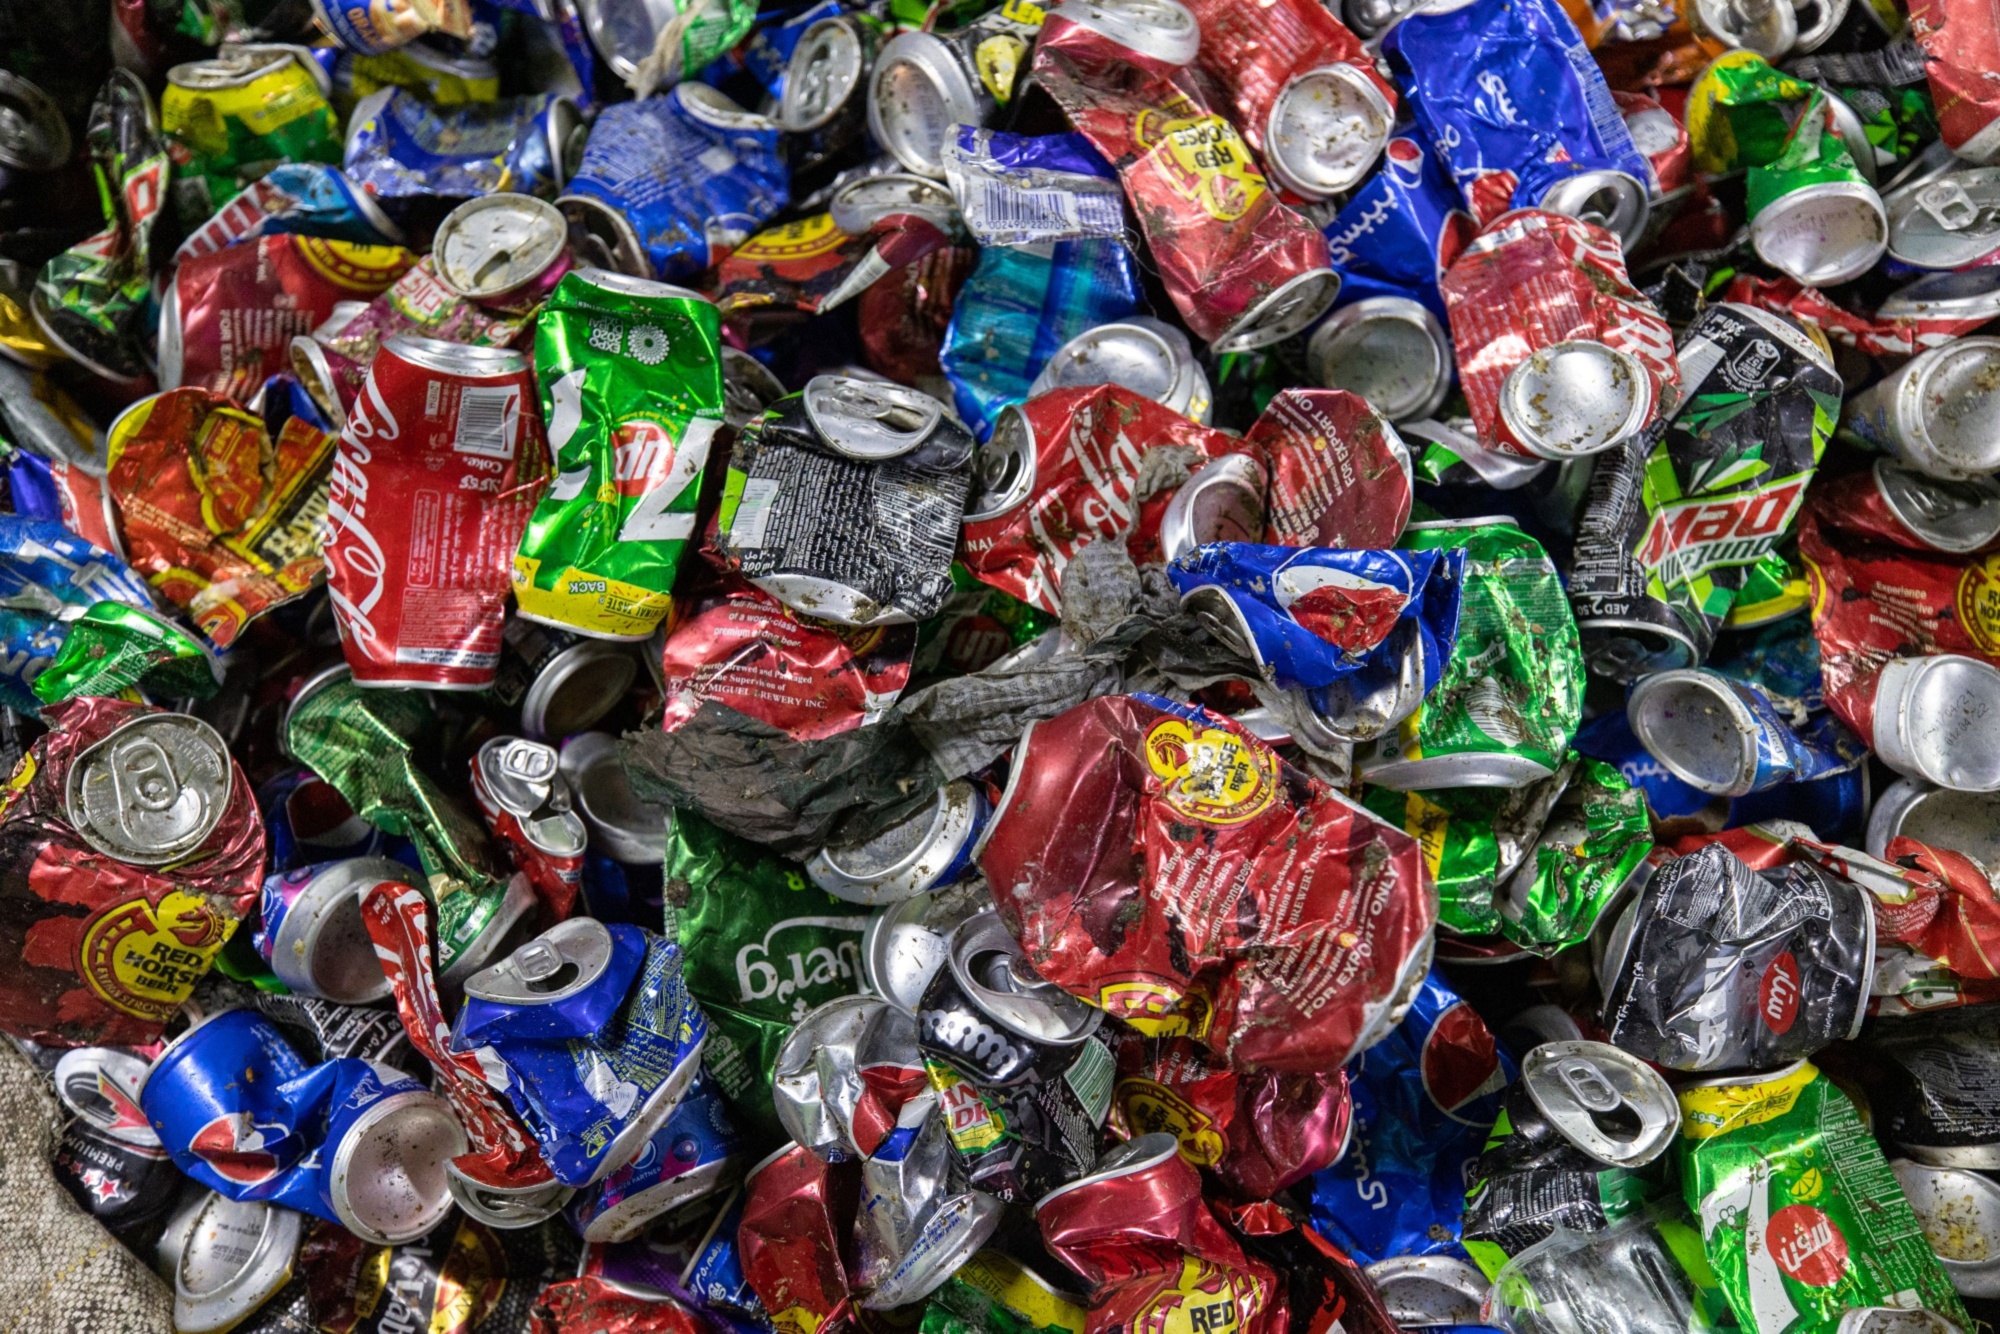 Soda companies and other product makers are increasingly being required to pay to recycle what ends up in the garbage.